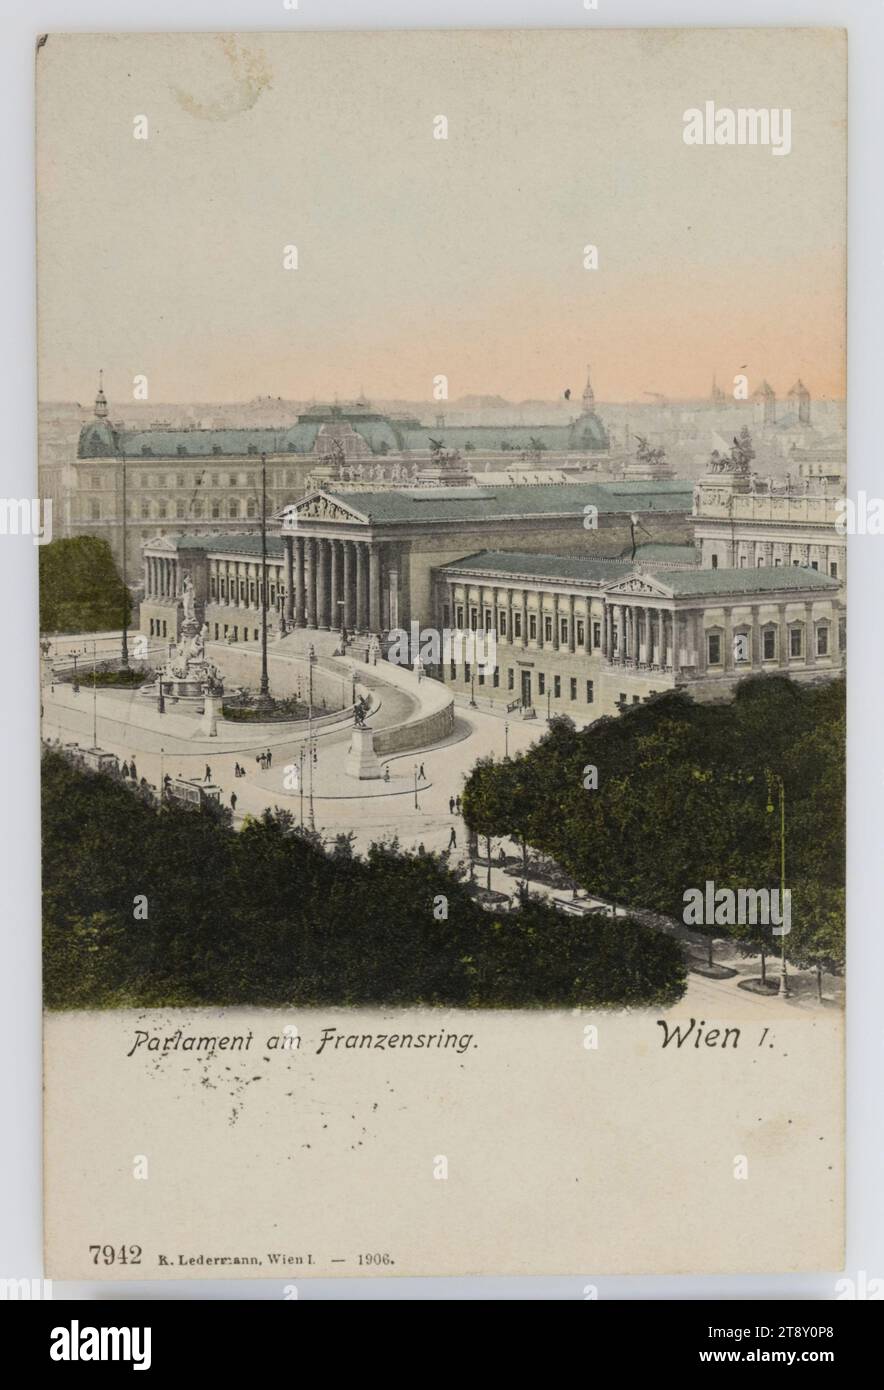 Parliament on Franzensring. Vienna I., Carl (Karl) Ledermann jun., Producer, 1906, paperboard, hand colorised, Collotype, Inscription, FROM, Kalksburg, TO, Krumbach, ADDRESS, An Wohlgeb., Herr, [Name], stud.gym., in Krumbach, Station Edlitz, Aspangbahn, N.Ö., MESSAGE, Dear friend!, You must not be angry, but I had no time to write to you until now. You will receive a photograph of me soon, nothing has changed in the college, only Father Wimmer is leaving for Maria-Schein as a professor. Director is P. Hoeller, For the rest, your faithful friend [signature], Attractions Stock Photo